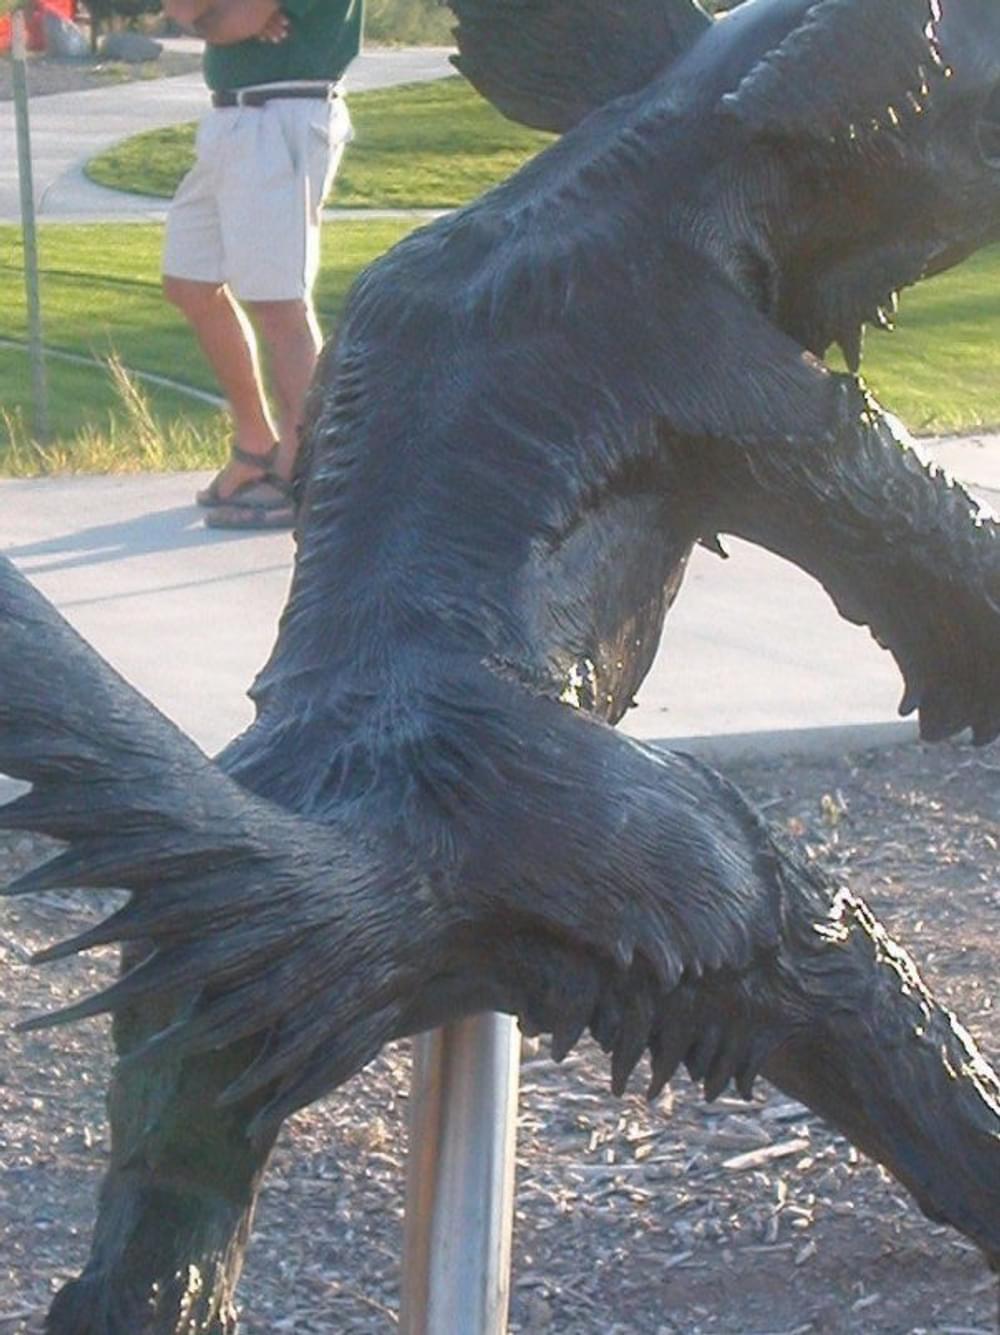 Sculpture along Riverfront Trail System in Grand Junction, Colorado